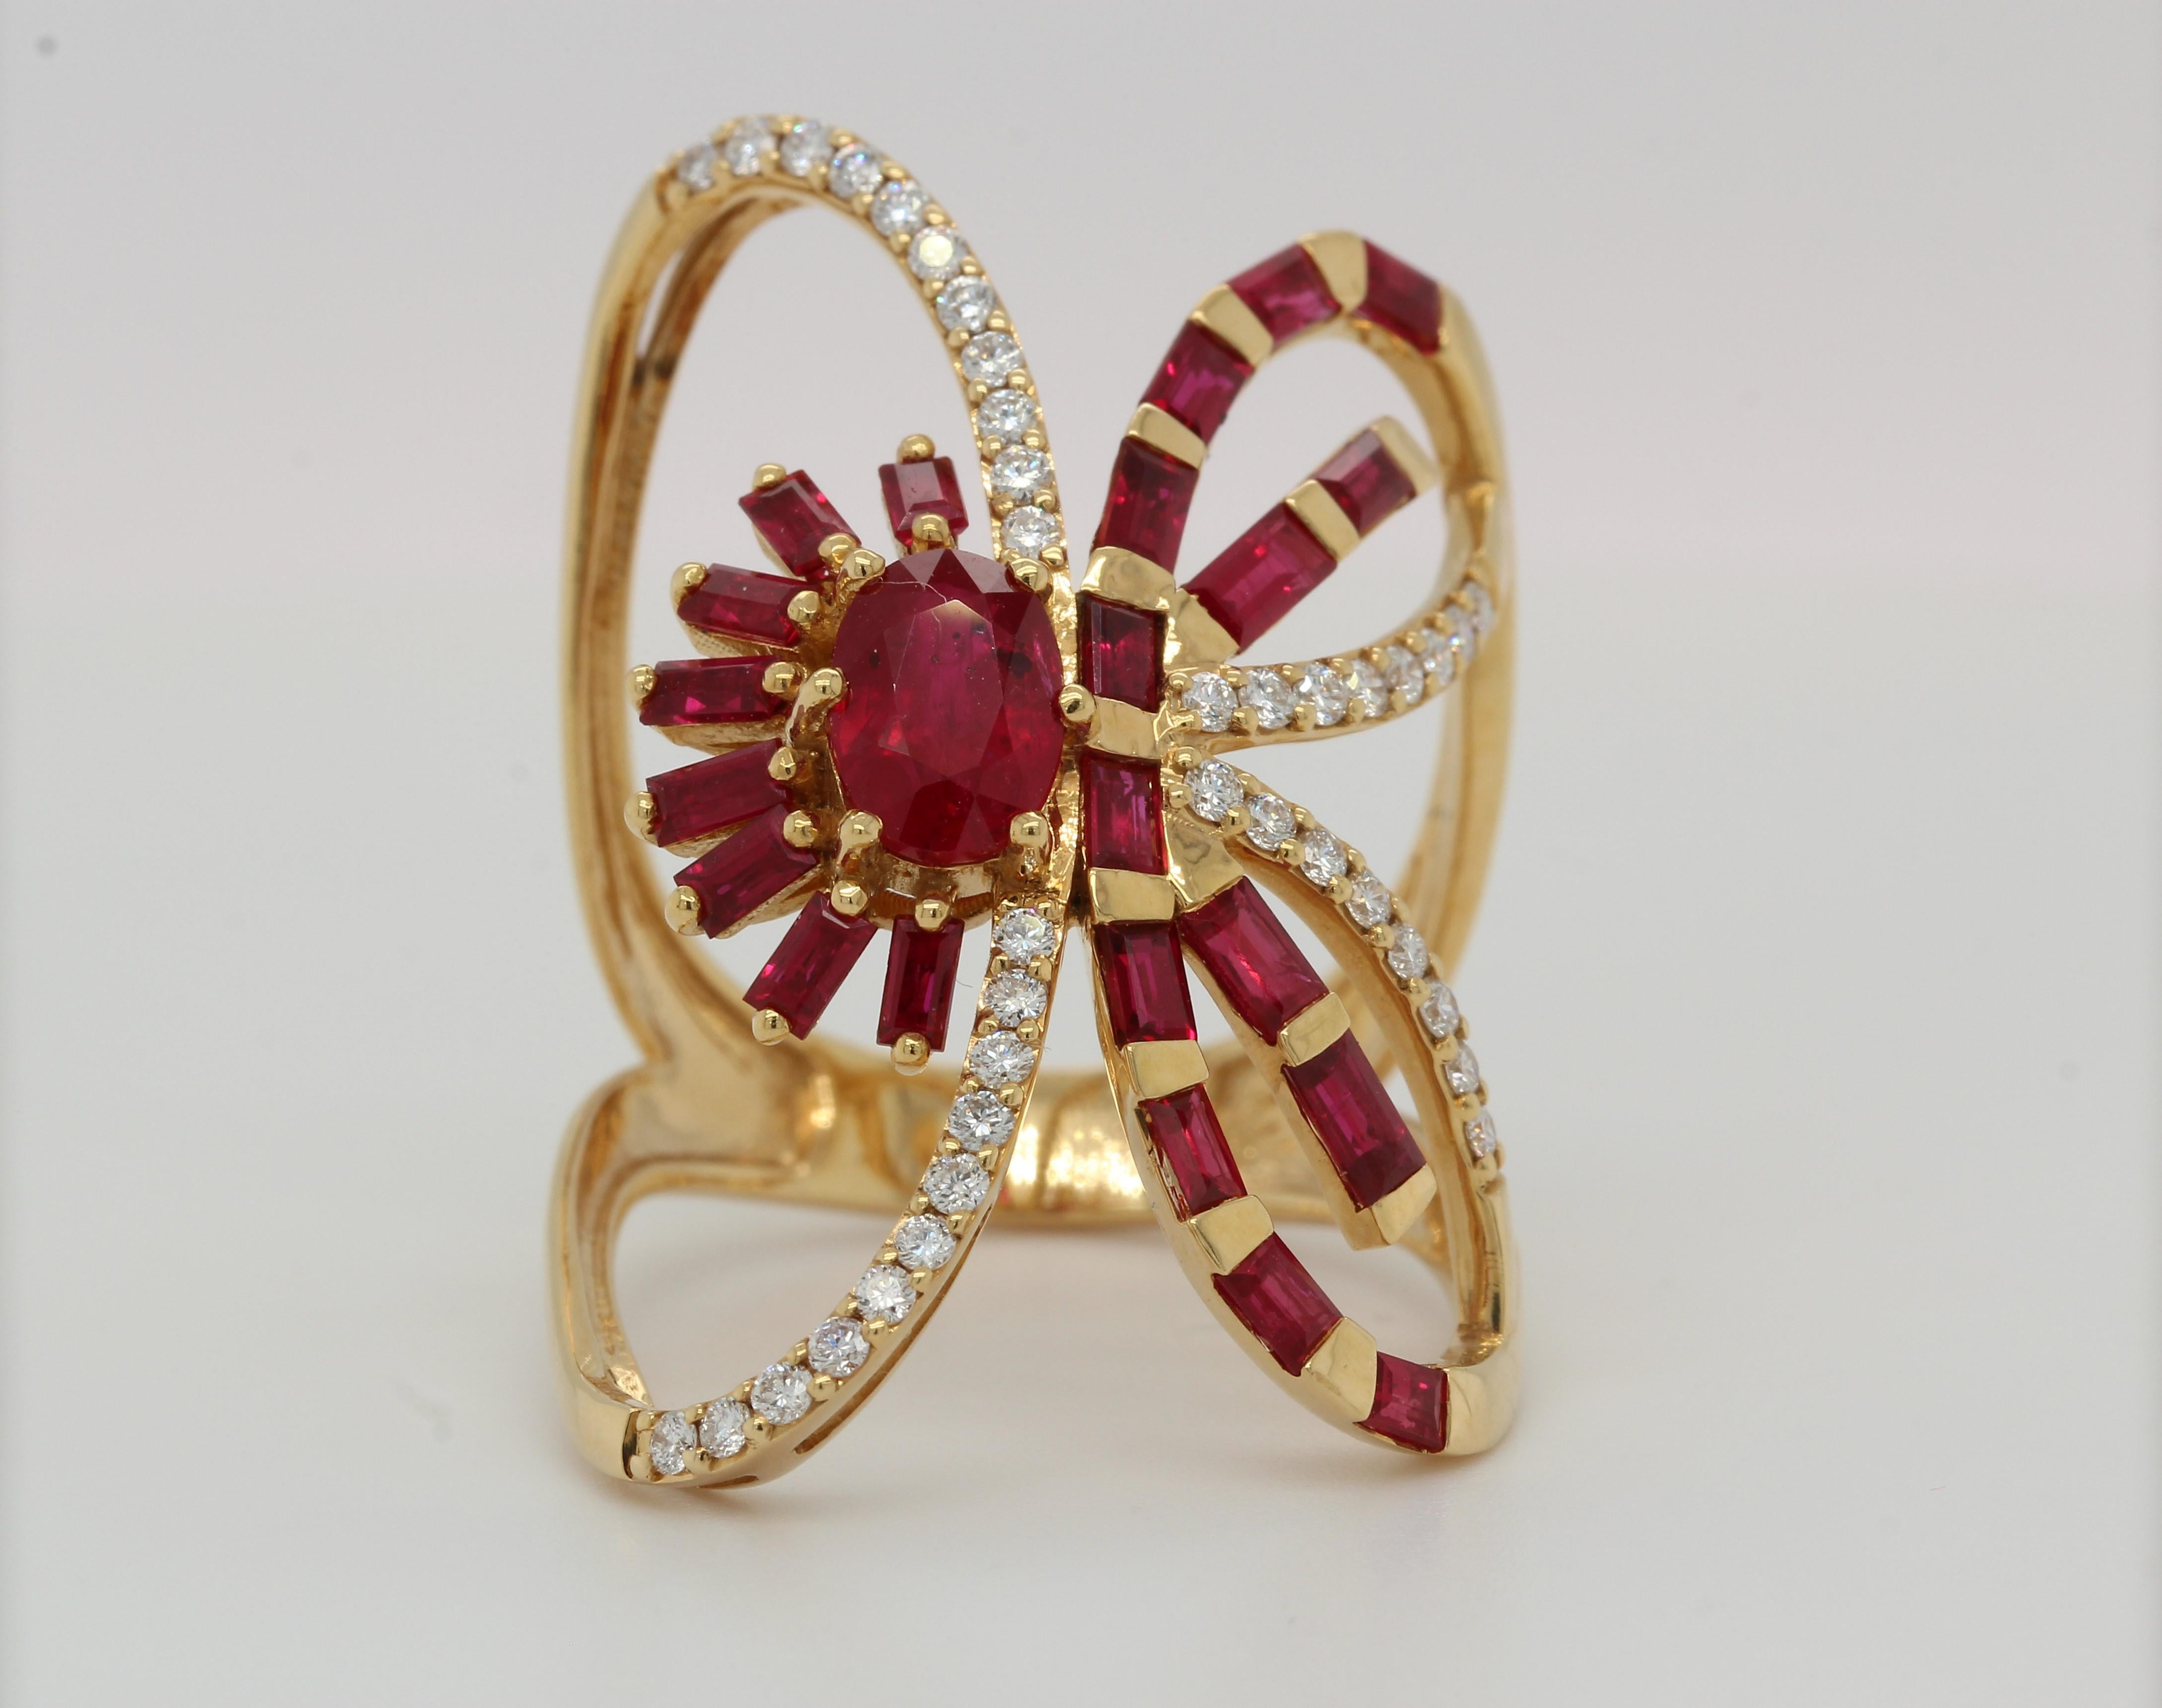 A gorgeous ruby and diamond butterfly ring in 18K gold.  The 18K gold butterfly ring with rubies and diamonds is a unique piece of jewelry that will catch all eyes the moment you wear it. Featuring gorgeous rubies and diamonds, this ring will make